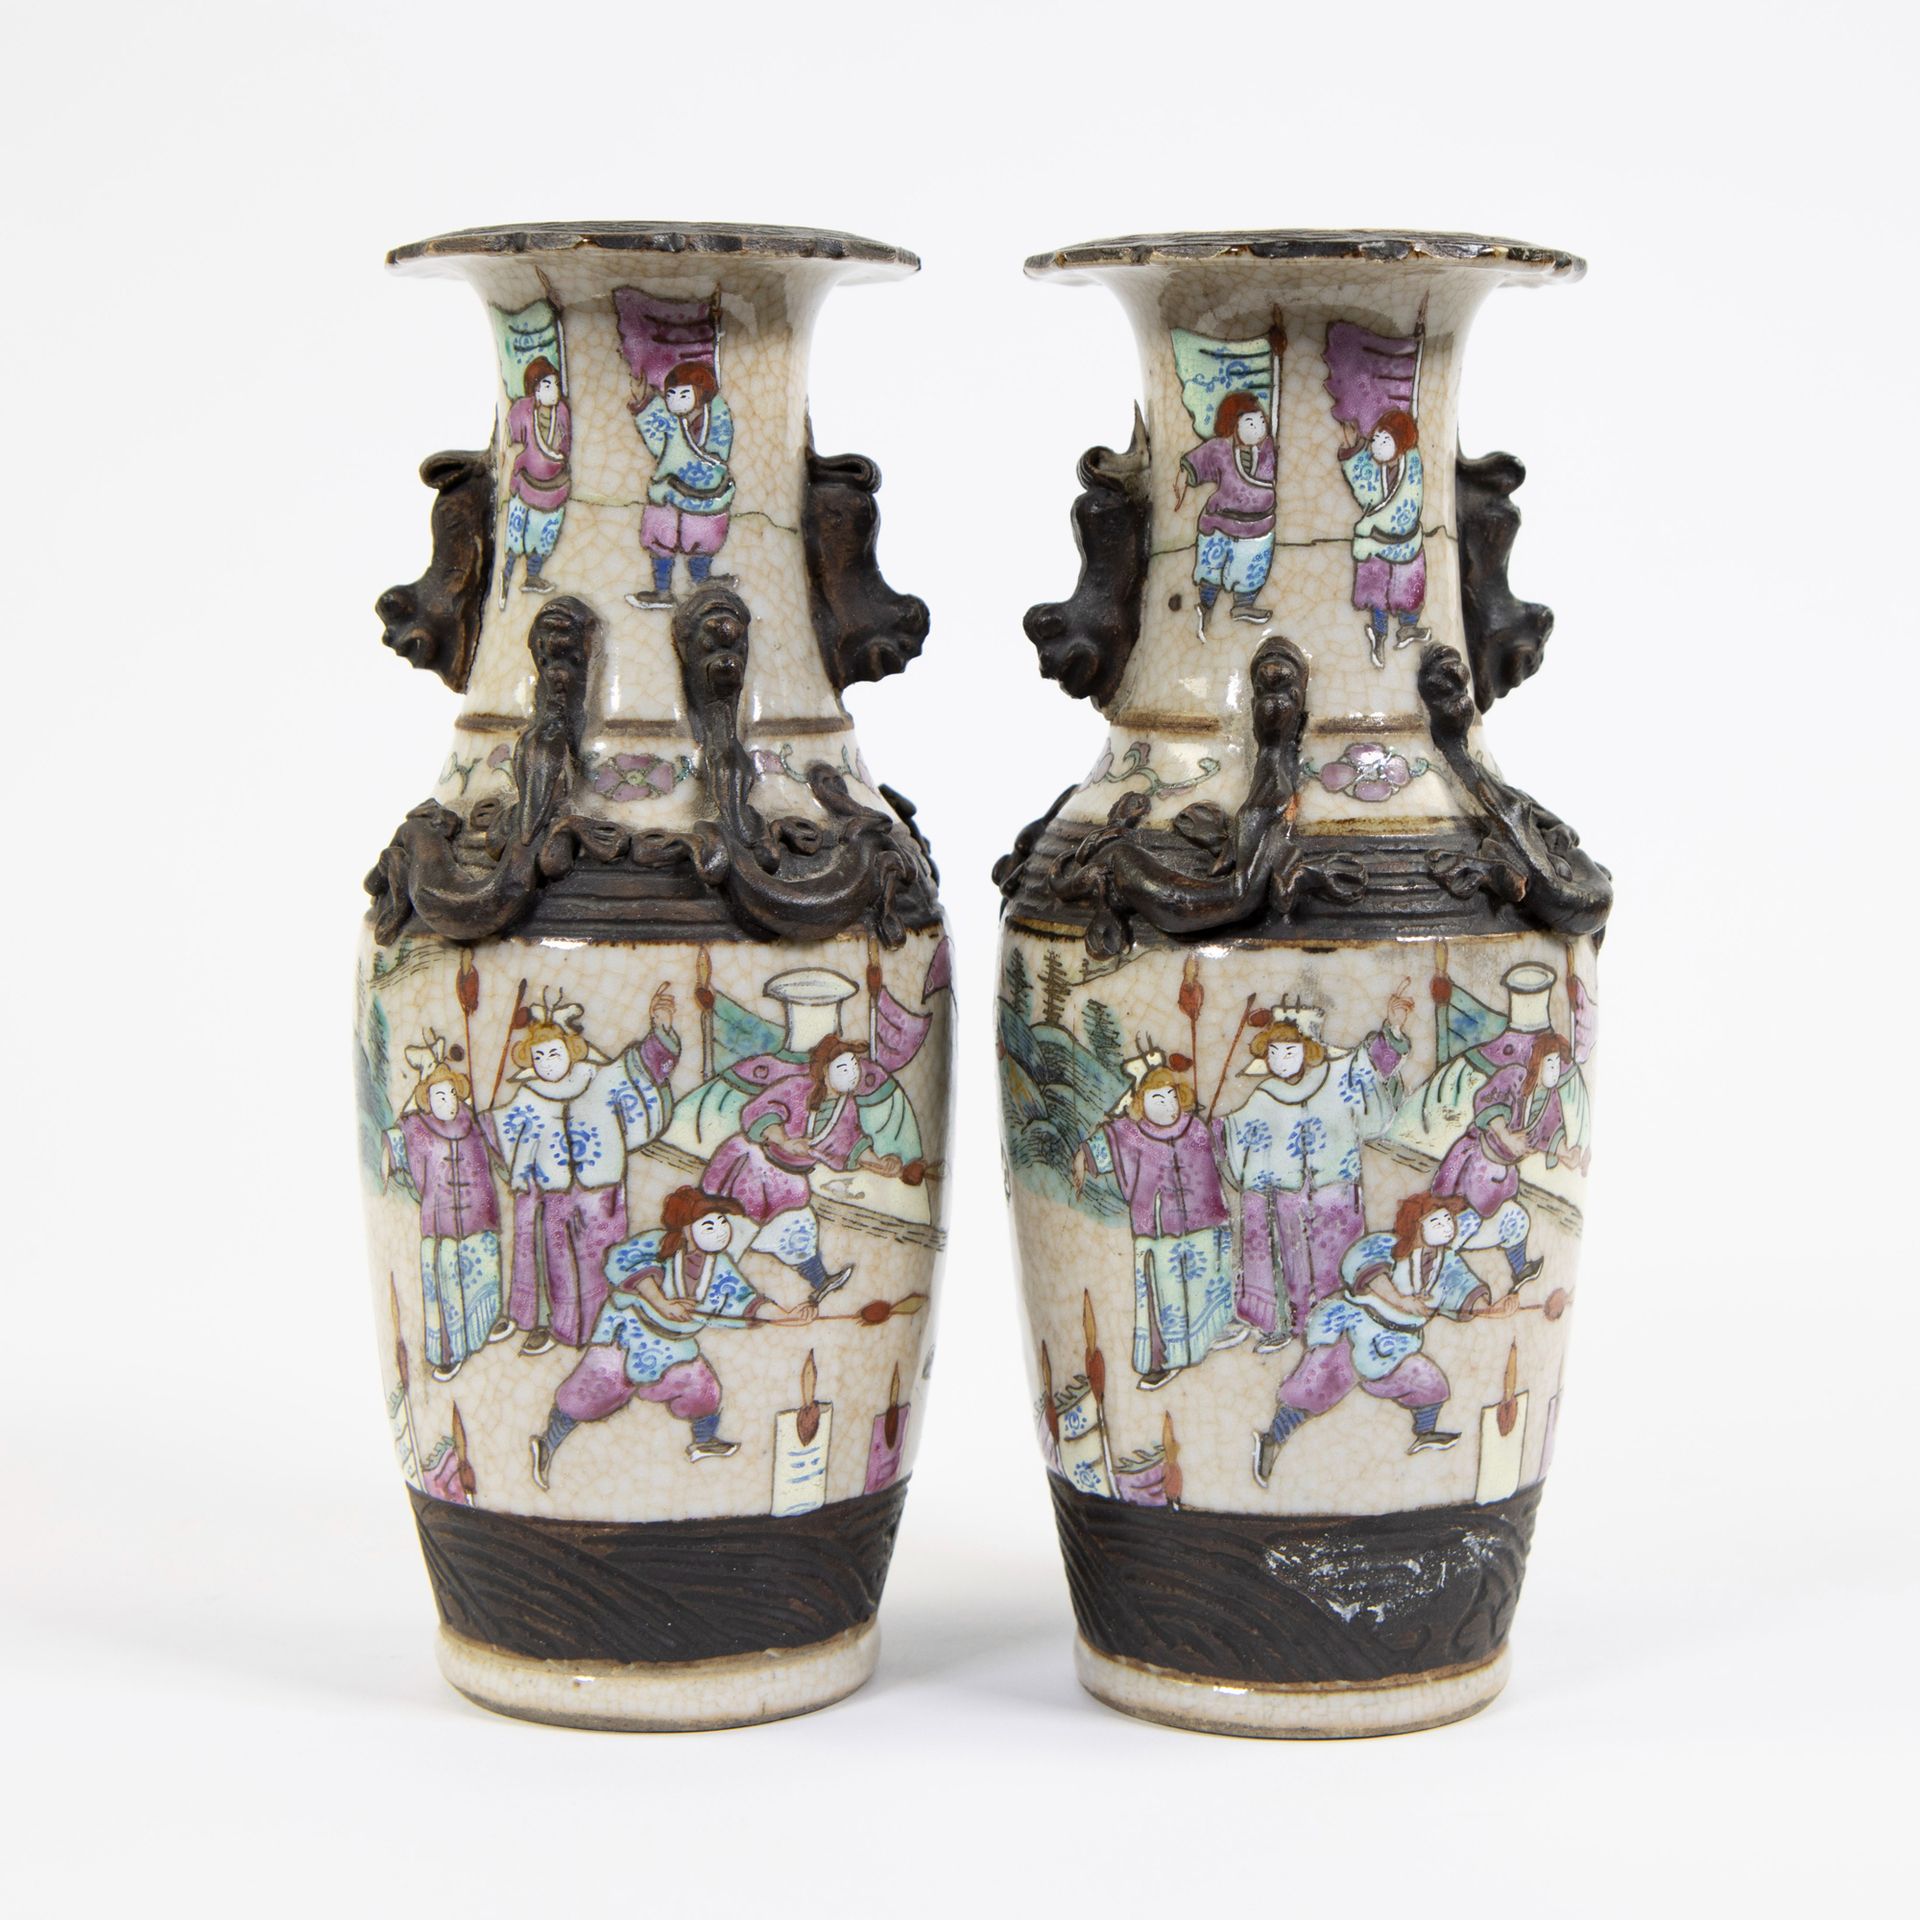 Null Collection of 2 Chinese Nankin vases, ca 1900
Lot van 2 Chinese Nankin vaas&hellip;